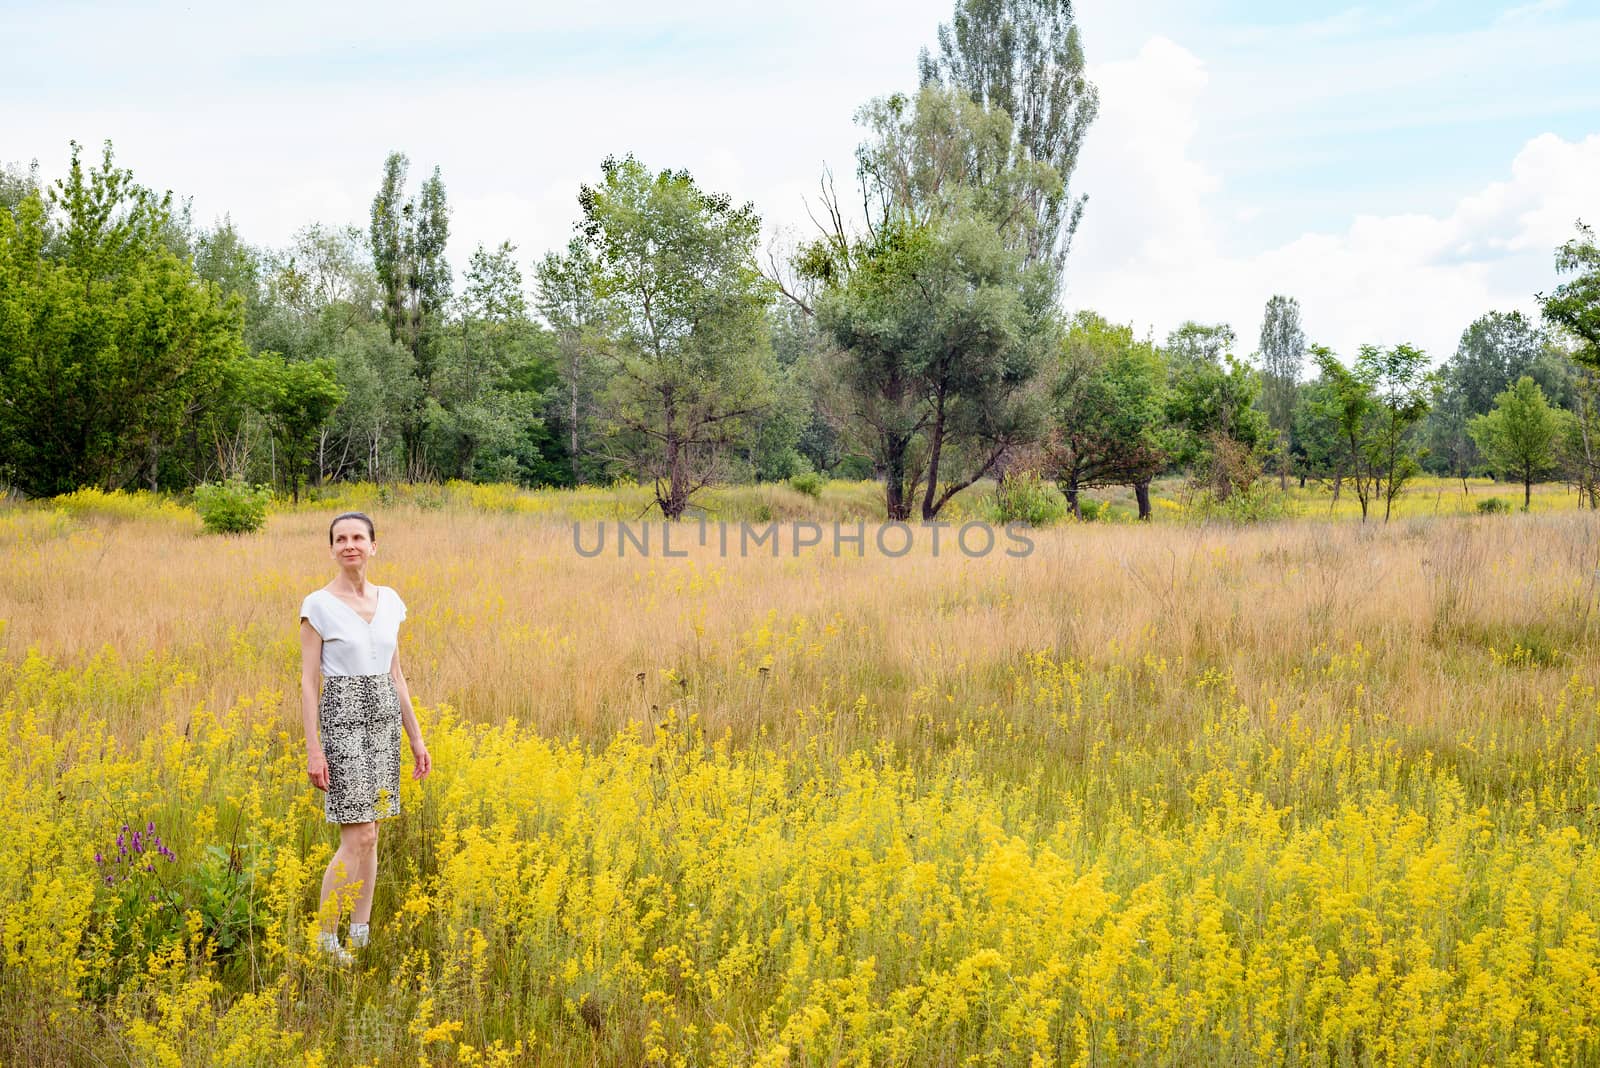 An adult woman stands up in a meadow covered with Galium verum flowers, also known as lady's bedstraw or yellow bedstraw, with a bunch of yellow flowers in her hands, in Kiev, Ukraine